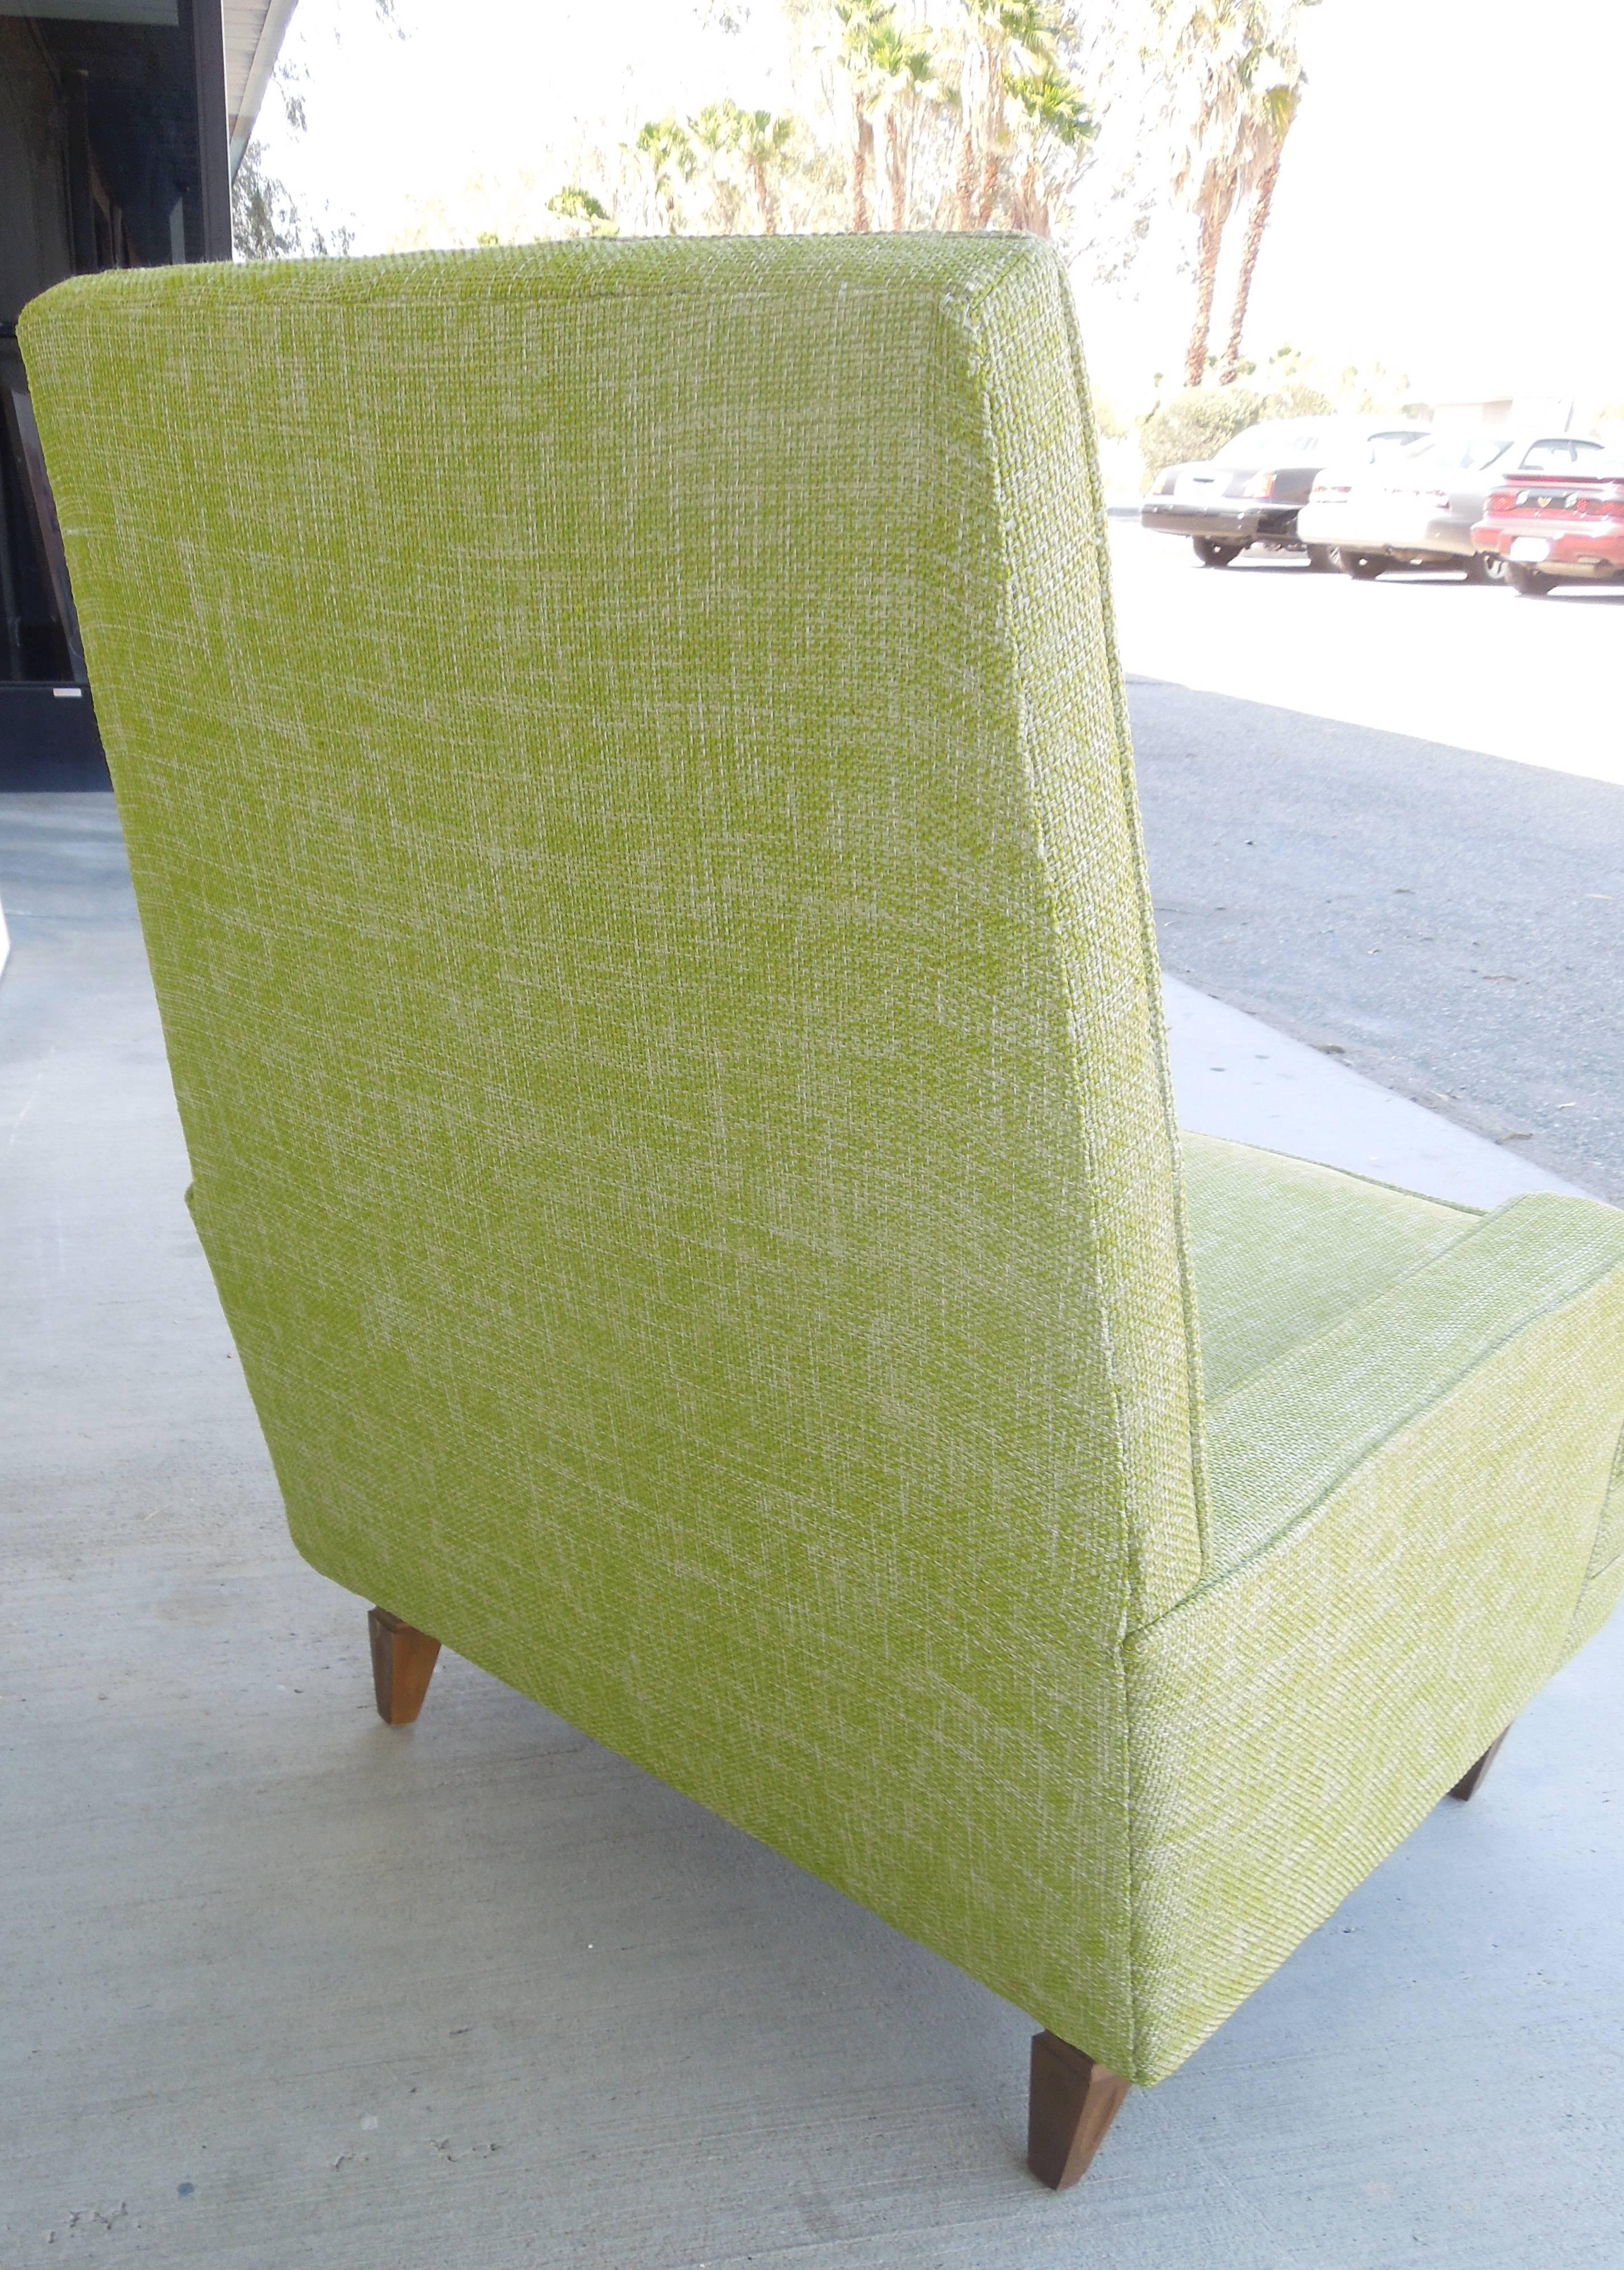 Mid-Century Modern 1960s Modern Tailored Armchair in New High End Lime Linen Tweed Fabric